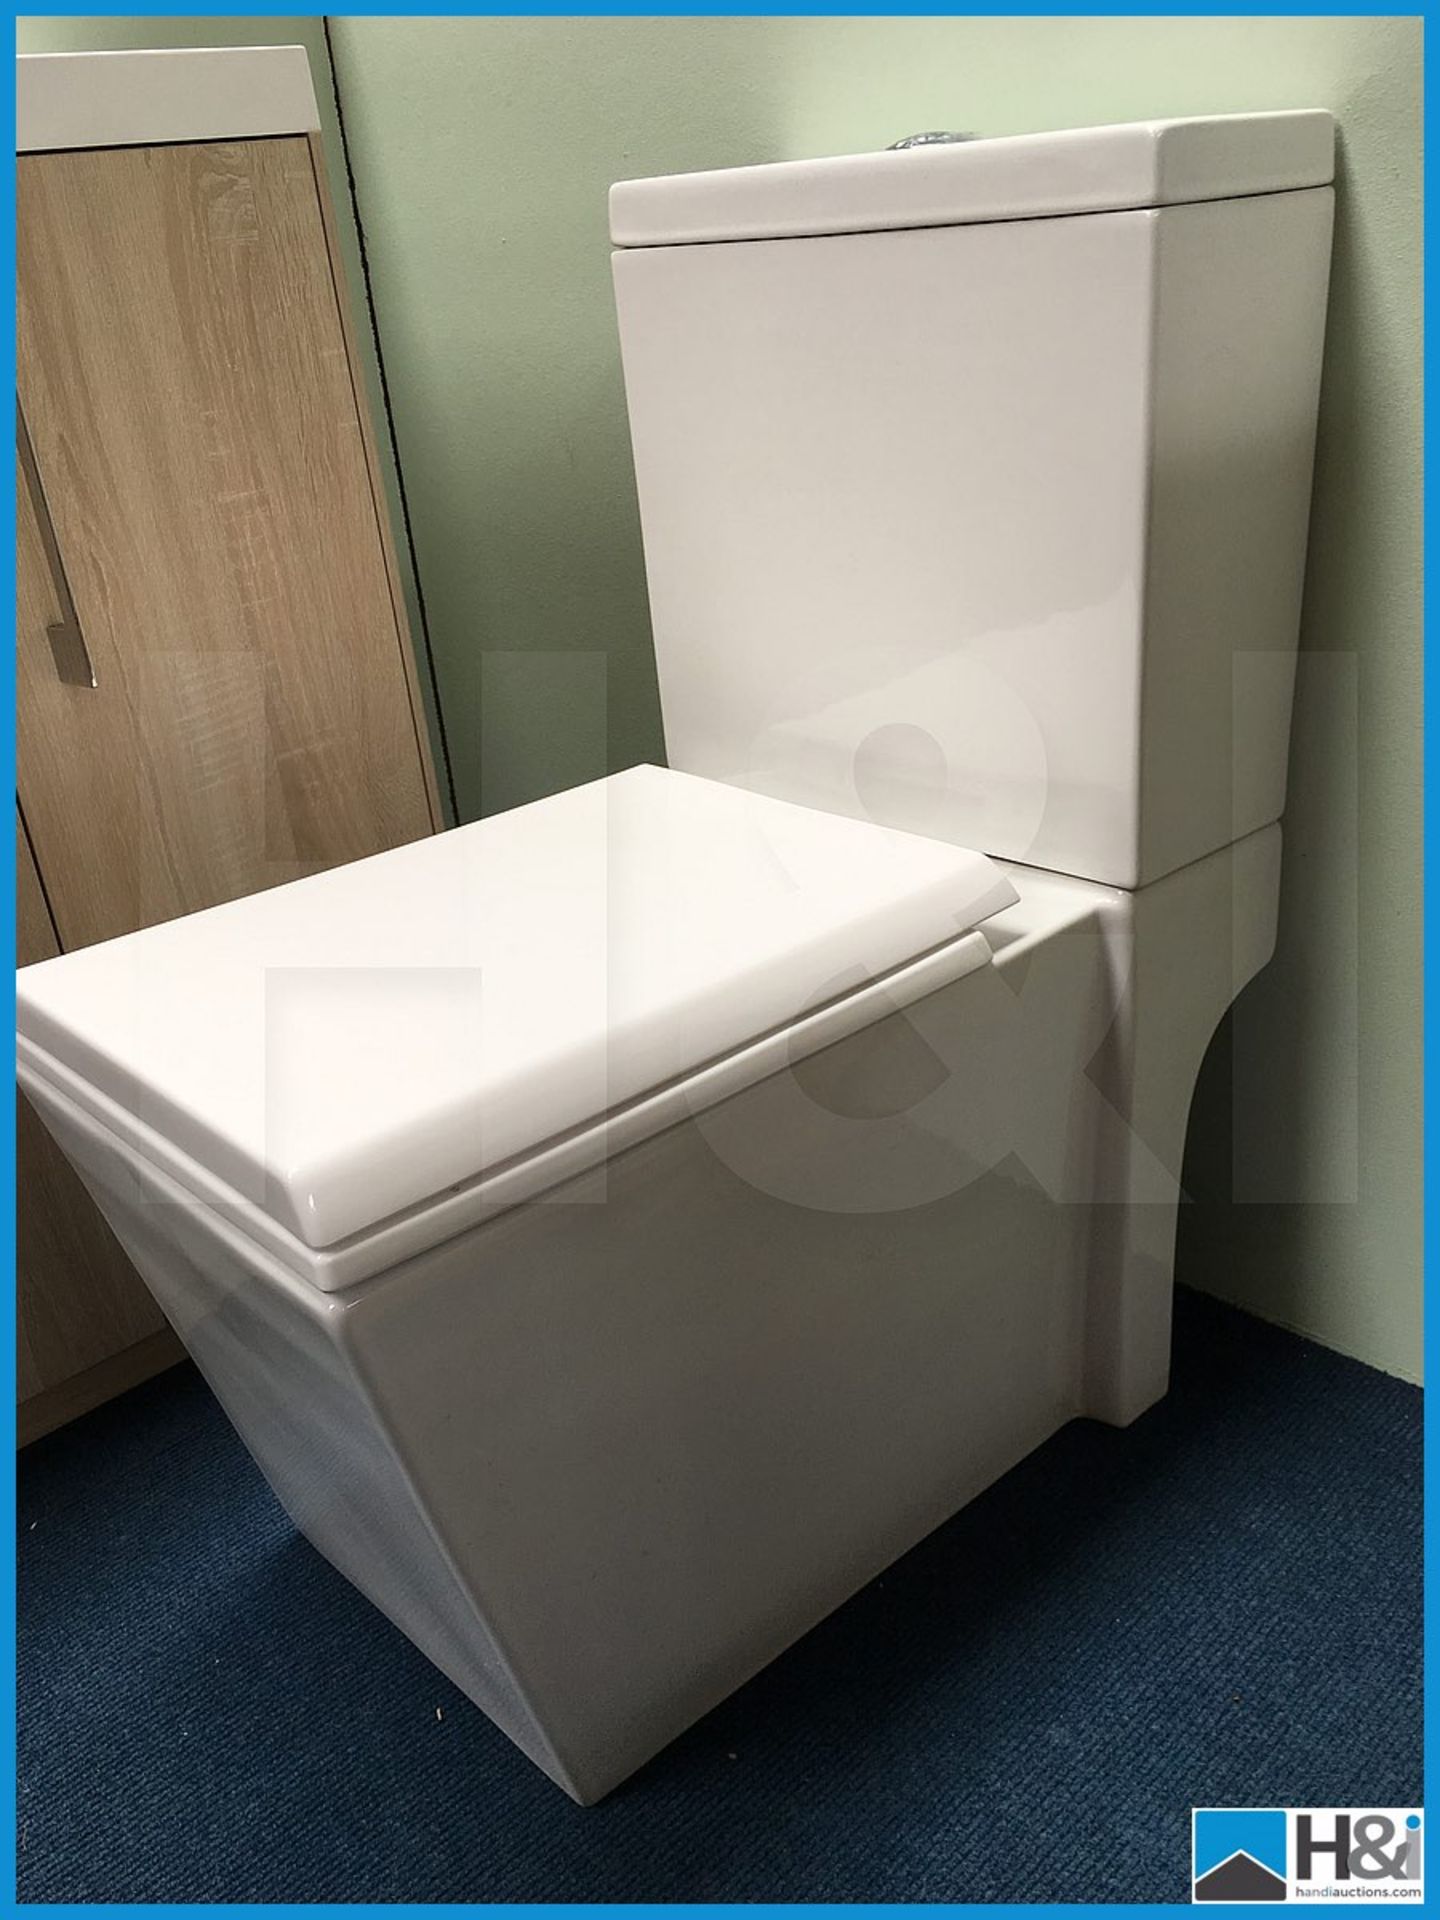 Stunning contemporary Milan square style close couple WC with top flush and soft close seat. New and